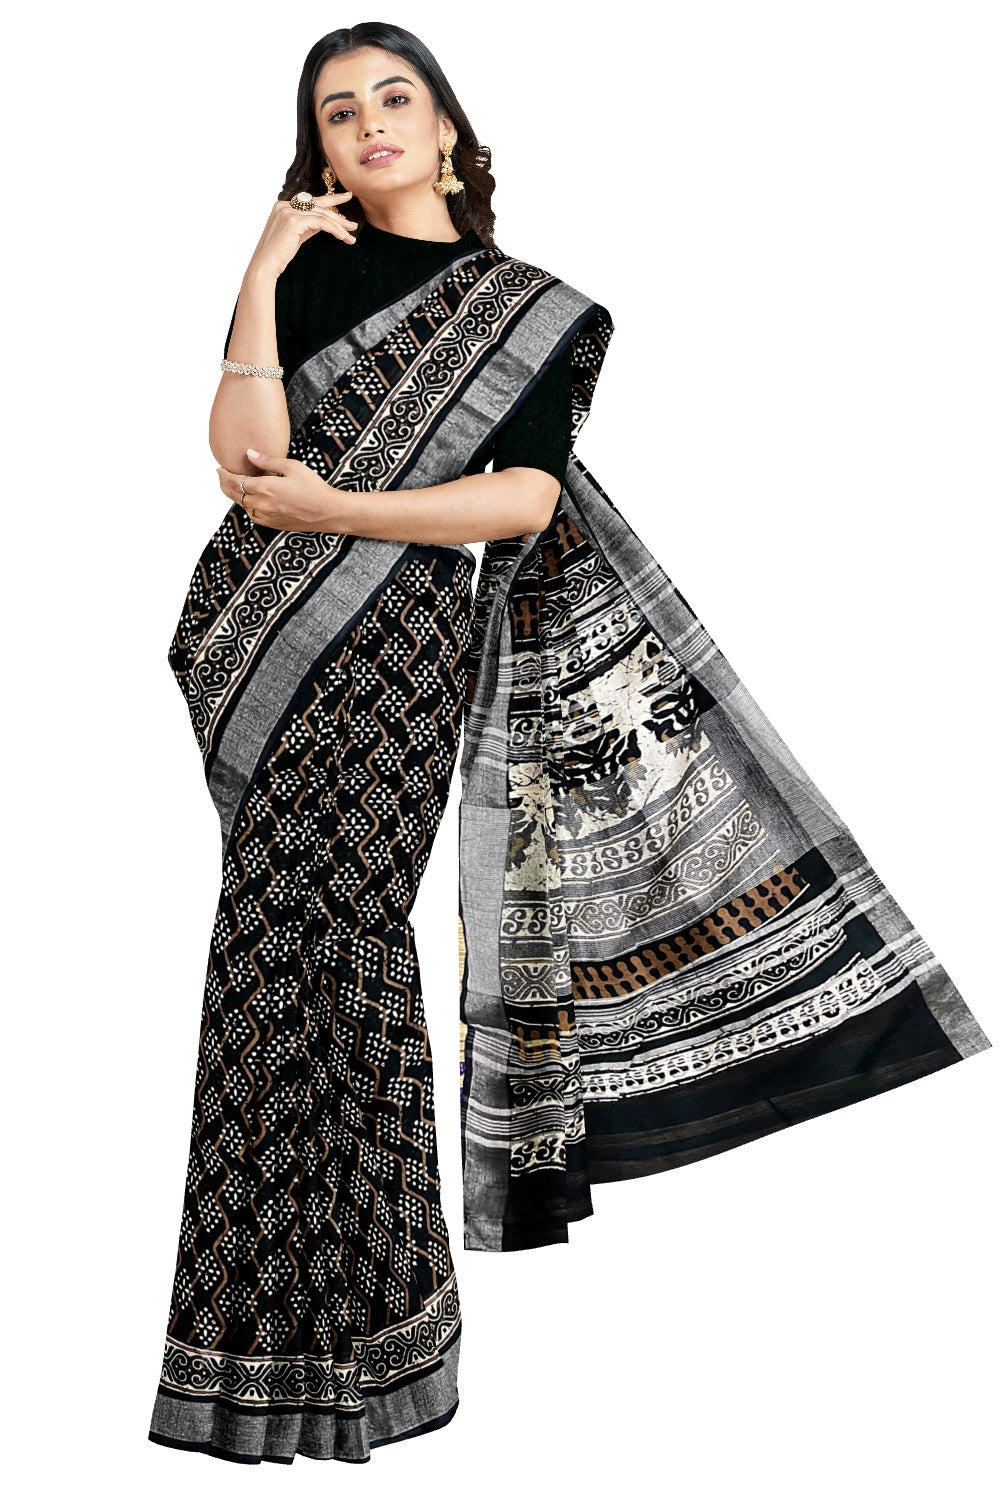 Southloom Linen Black Saree with White Designer Prints and Tassels on Pallu